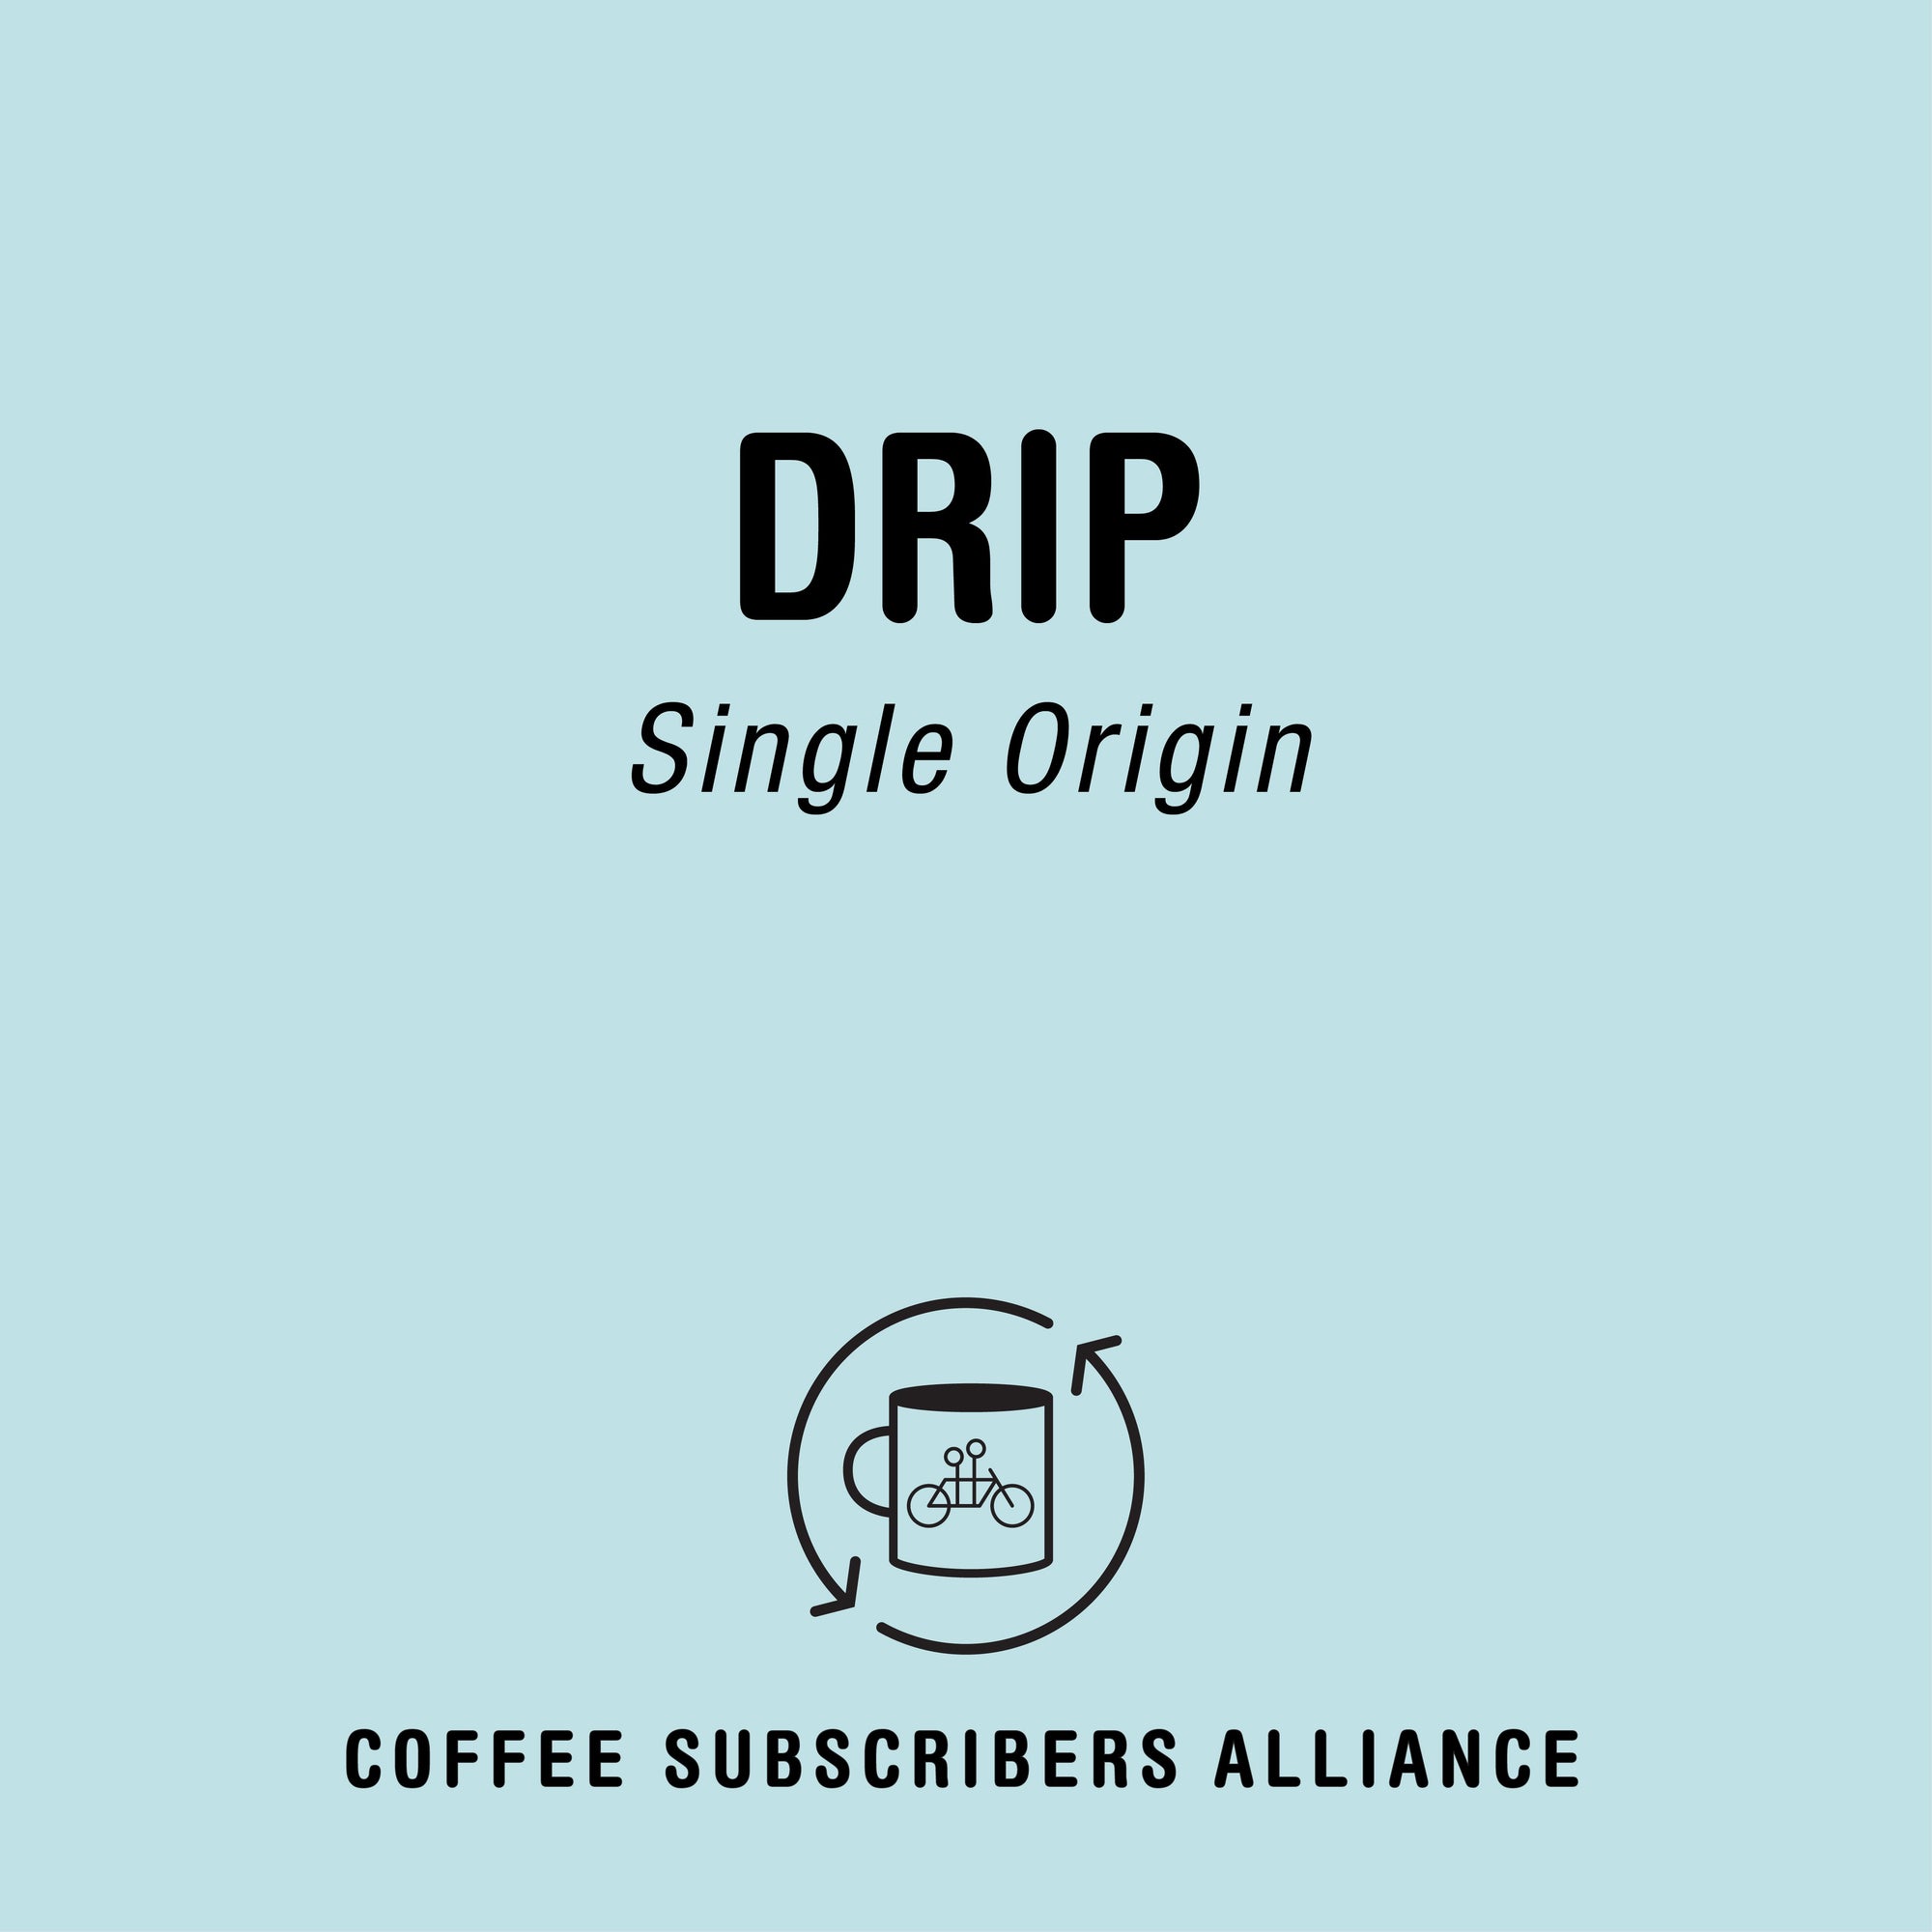 Logo of "Tandem Drip Subscription Gift - 8 Weeks x 12" for the coffee subscribers alliance featuring a simplistic coffee cup icon encircled by text, set against a soft blue background.